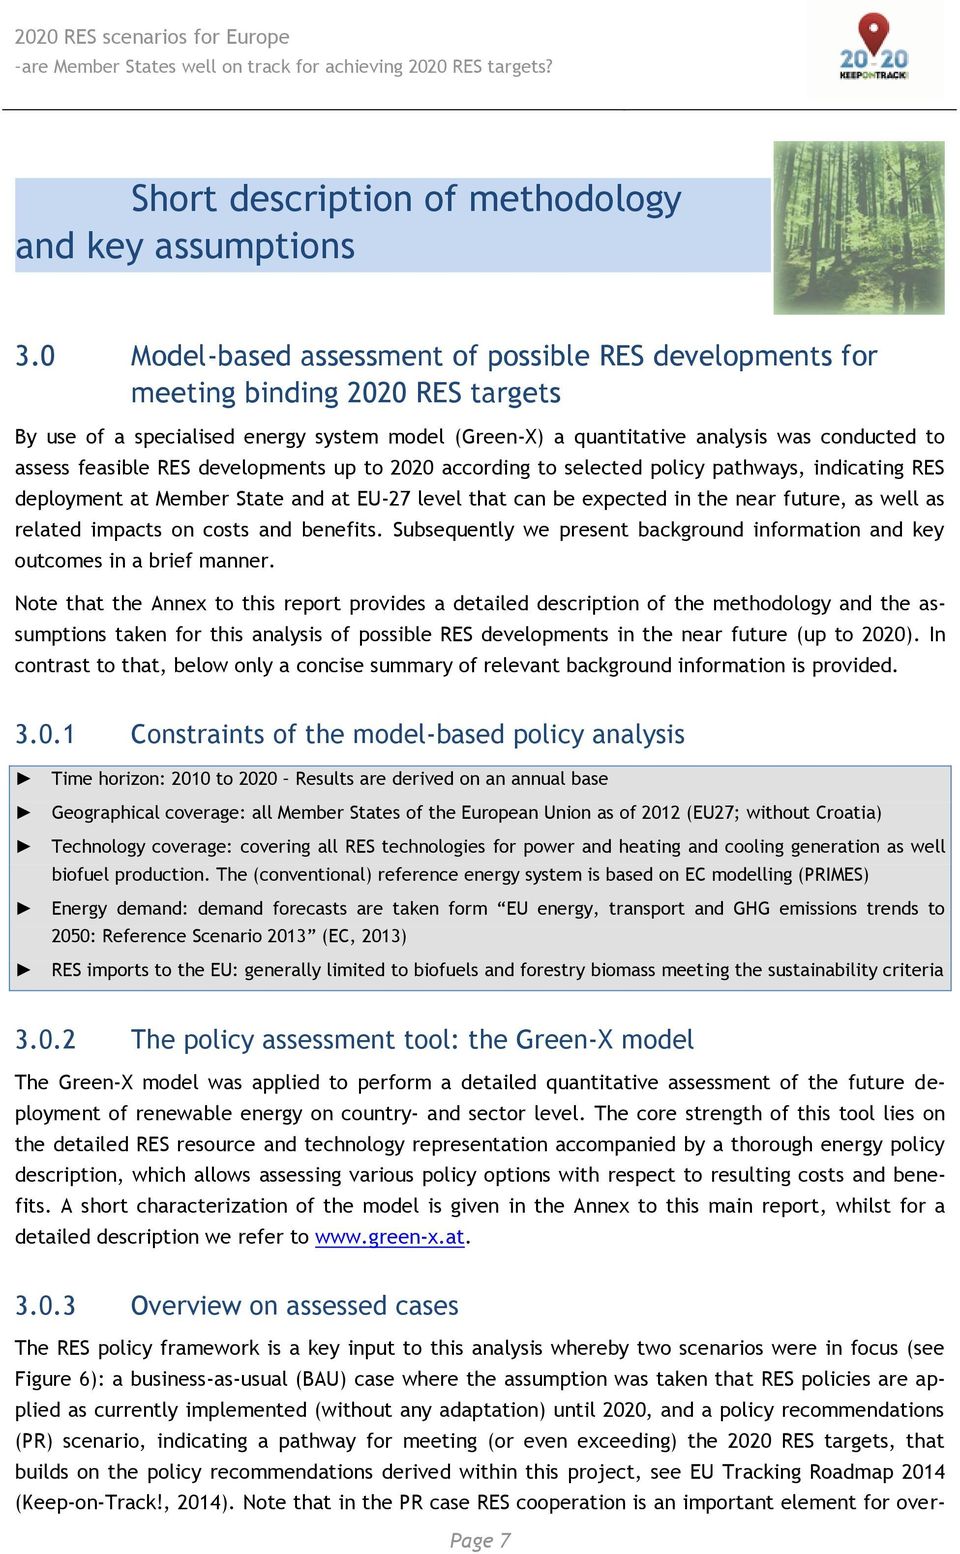 RES developments up to 22 according to selected policy pathways, indicating RES deployment at Member State and at EU-27 level that can be expected in the near future, as well as related impacts on